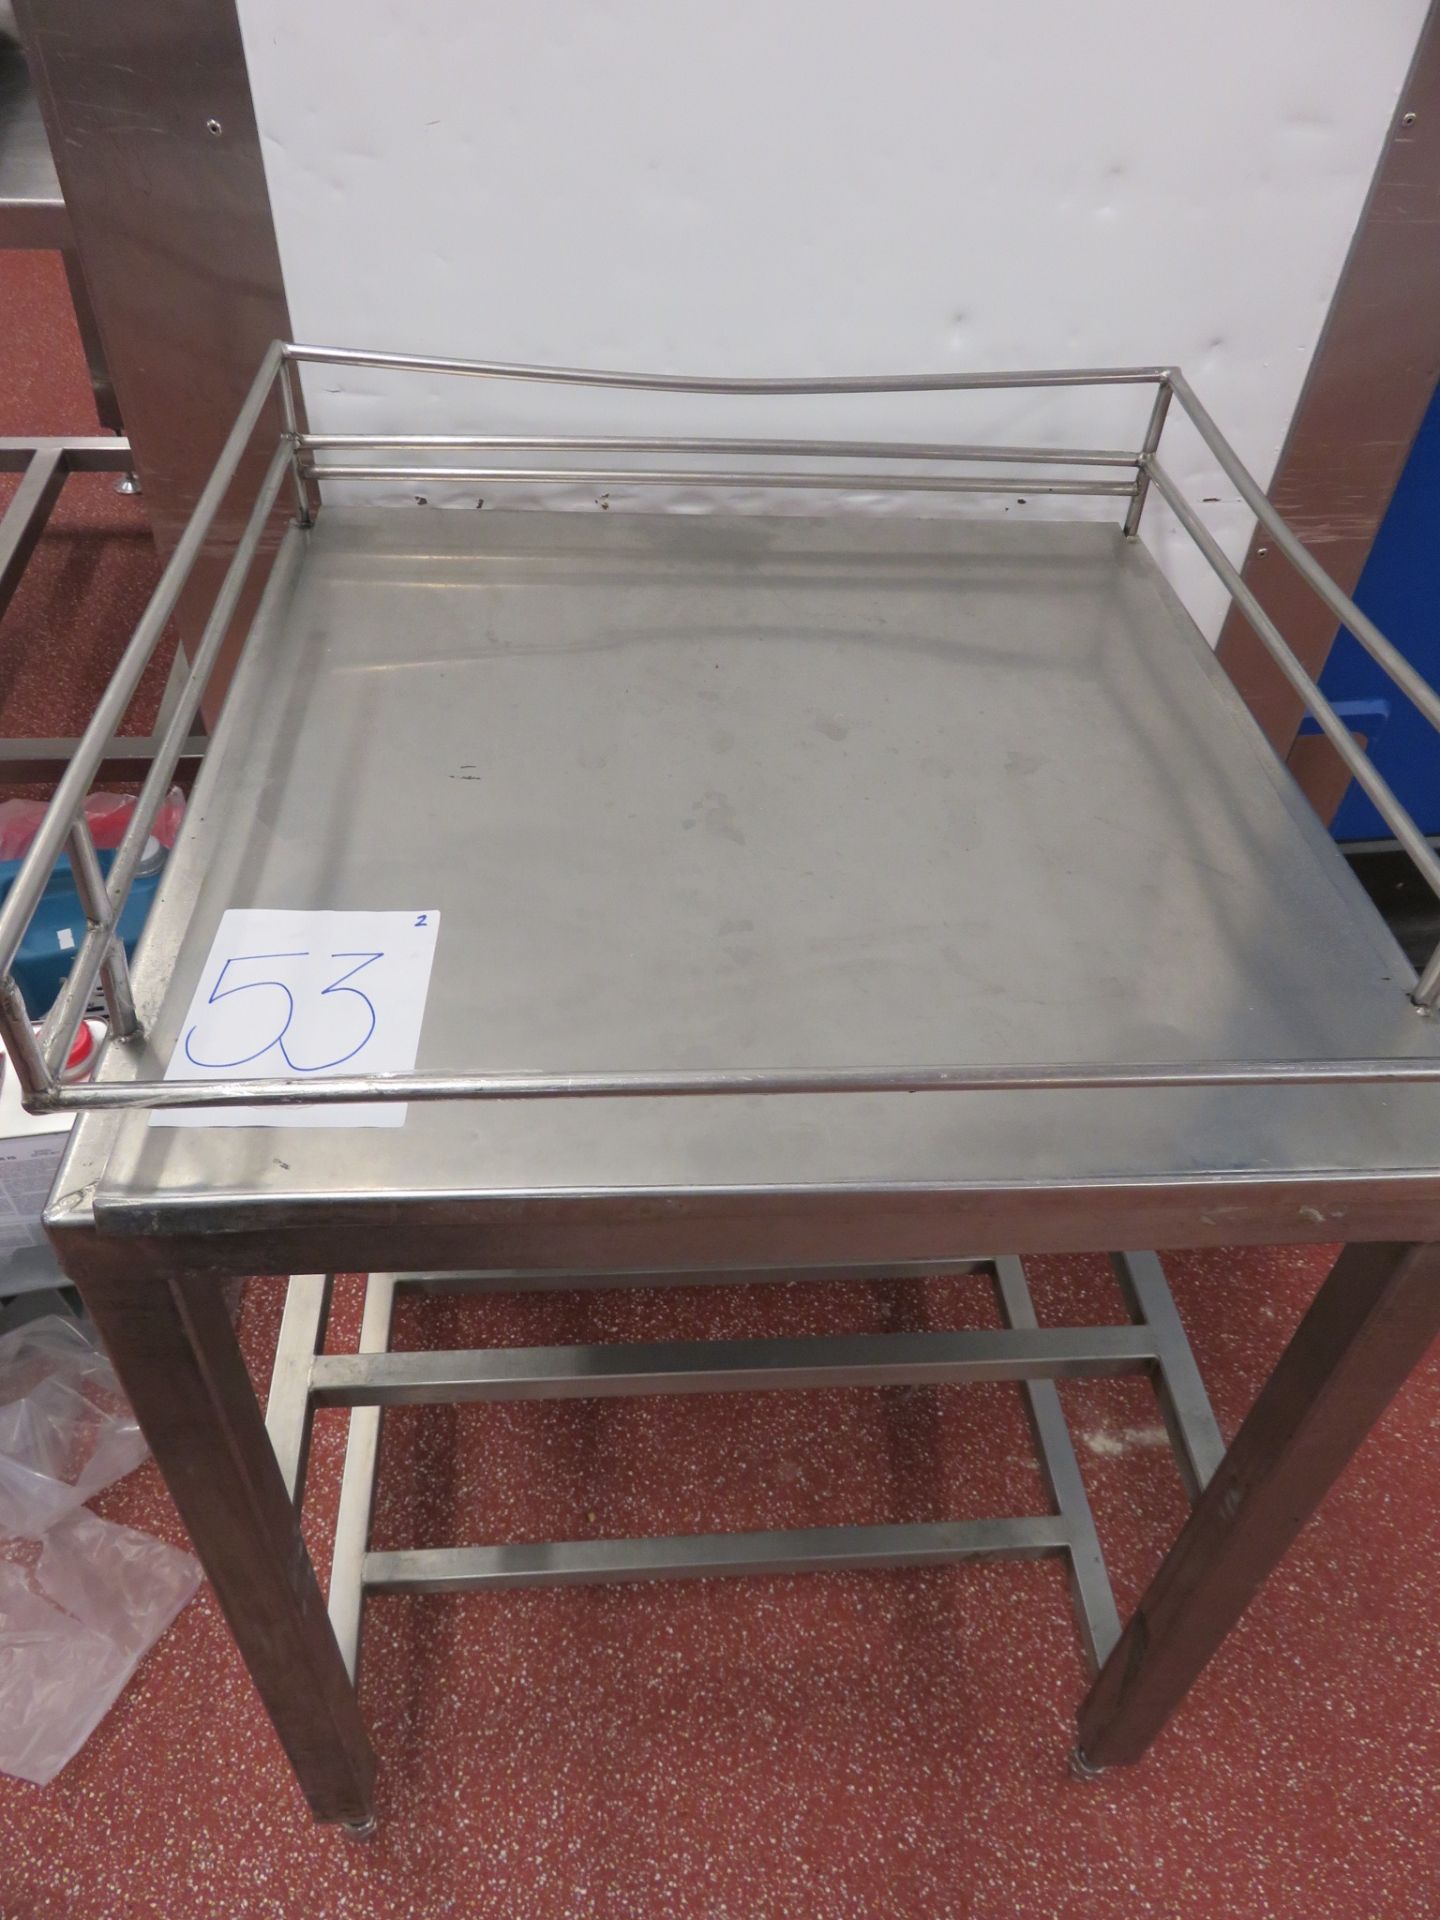 S/s Draining Table with table top. Lift Out £5